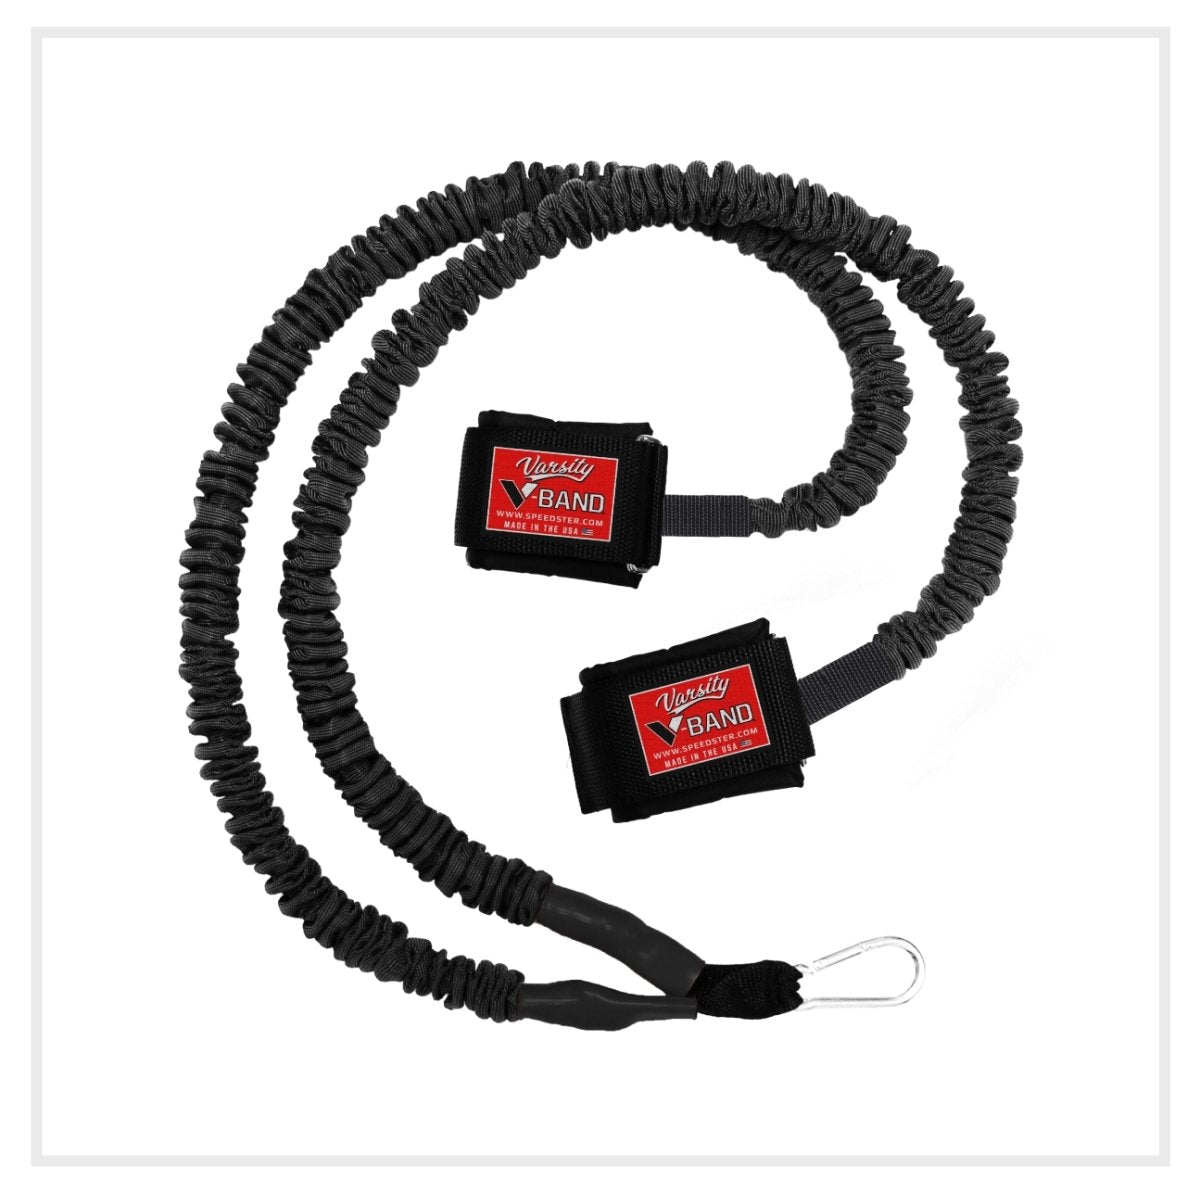 Varsity V-Band Very Heavy (40lbs) best resistance bands made in USA and covered for safety - FitCord Resistance Bands. Compare to J-Bands by Jaeger. Made in America and Covered for safety. Last 5x longer than jbands